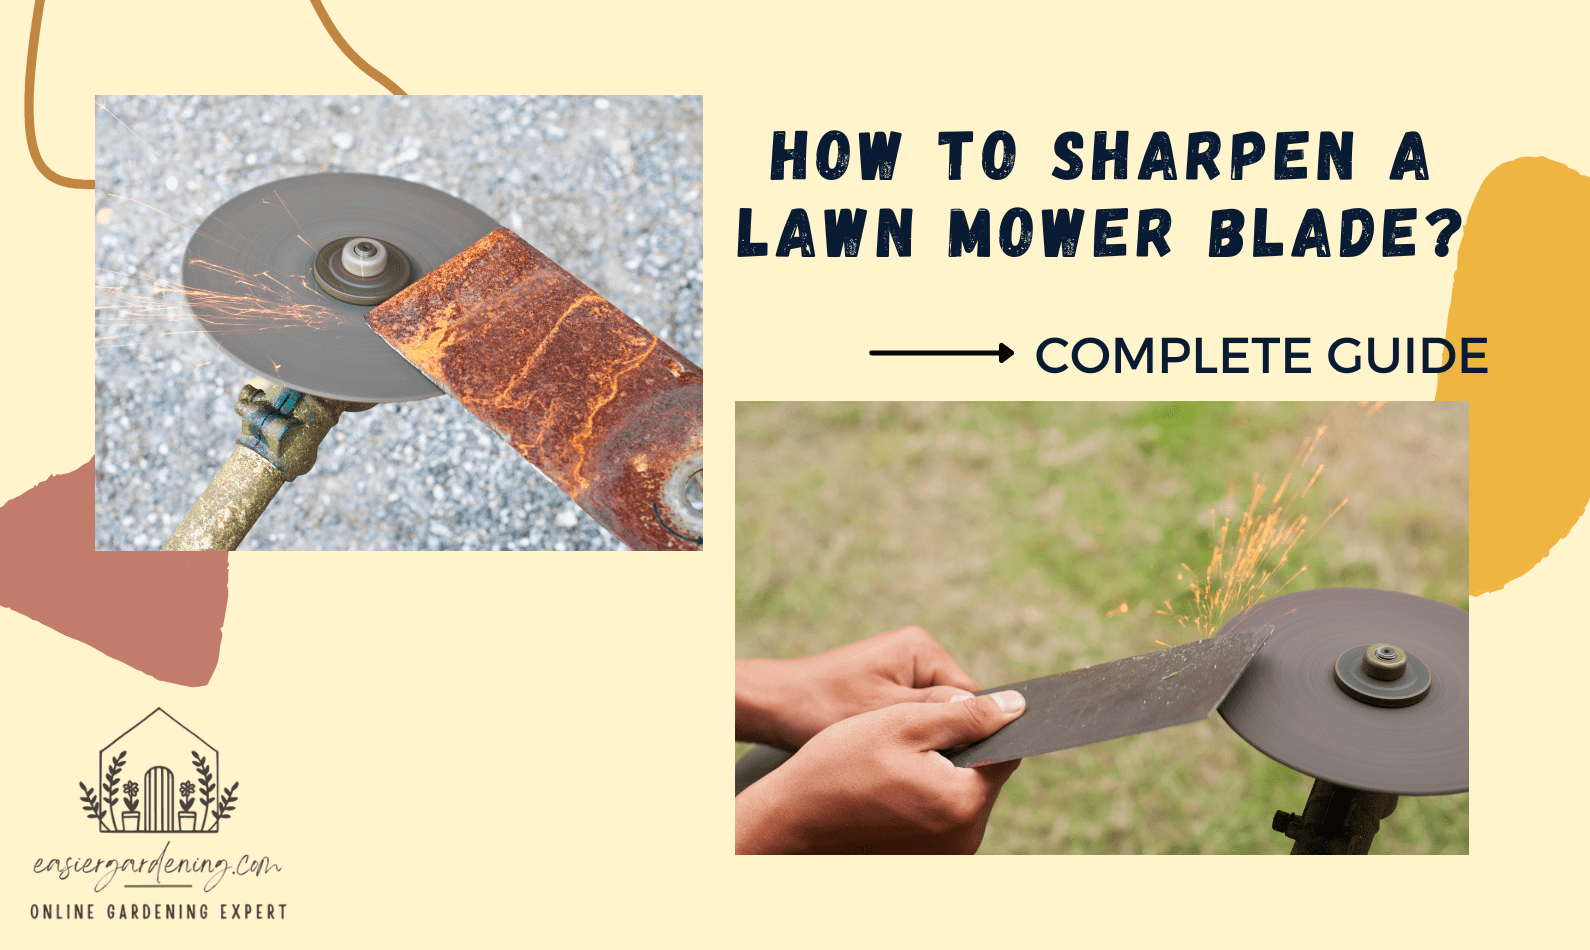 How to Sharpen a Lawn Mower Blade?